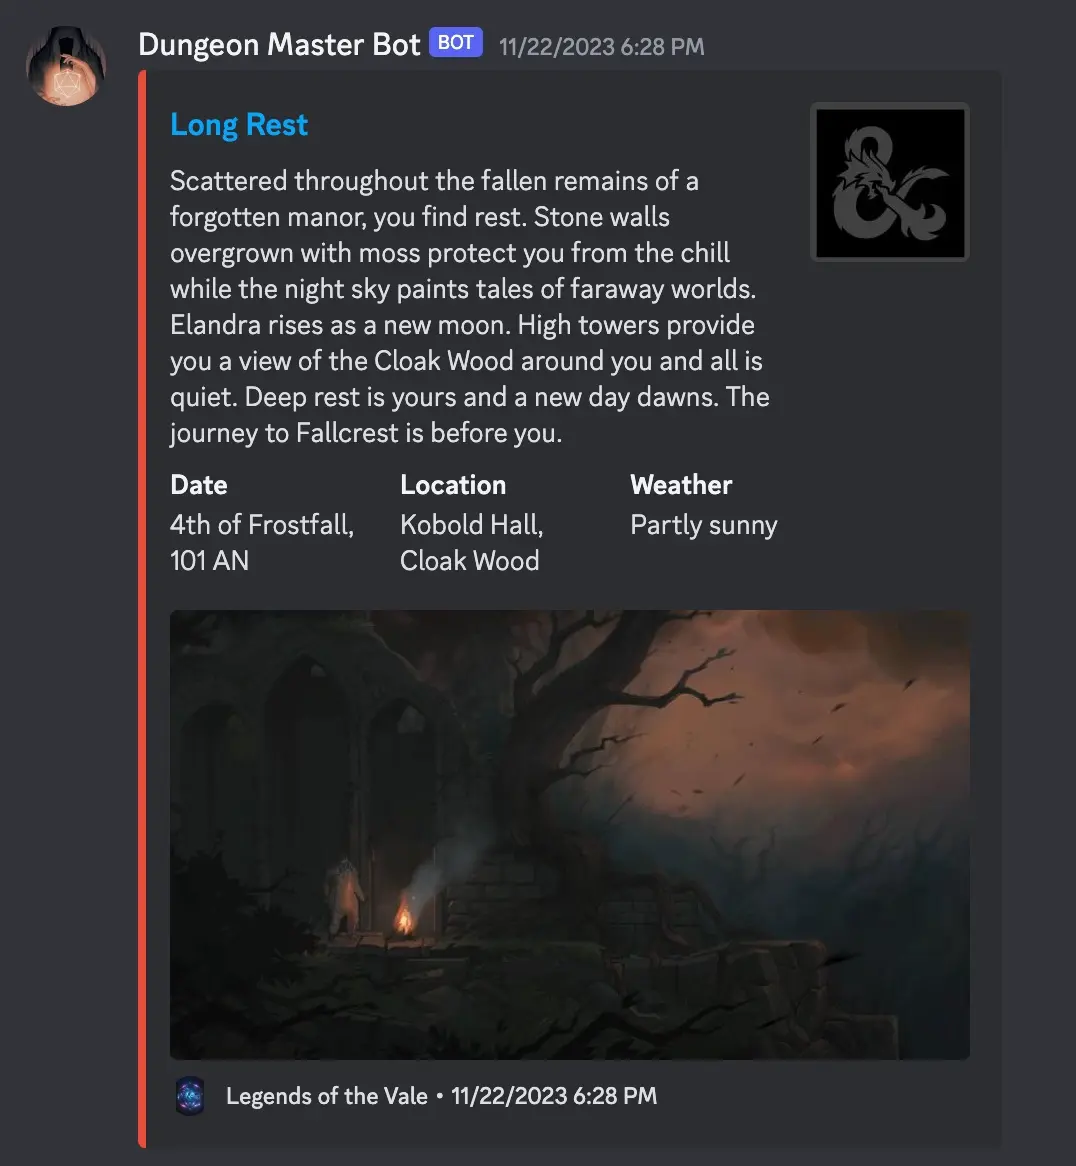 Screenshot of a Discord embed describing a Long Rest with links and images